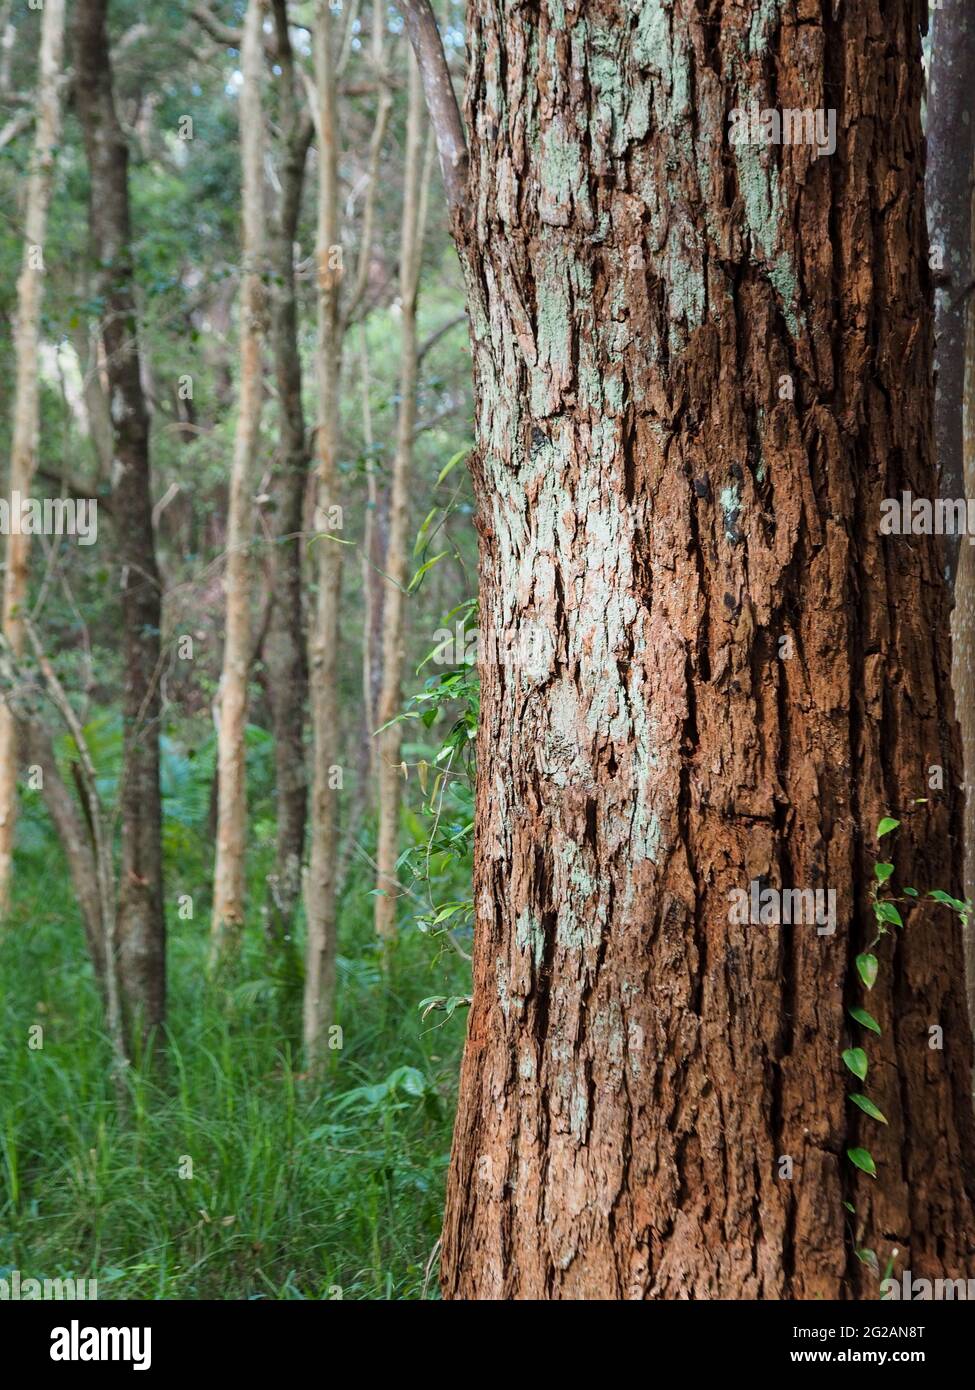 Beautiful natural light falling on this Swamp Mahogany tree trunk with reddish brown bark, brushed with pale green moss,  in the Australian bushland Stock Photo